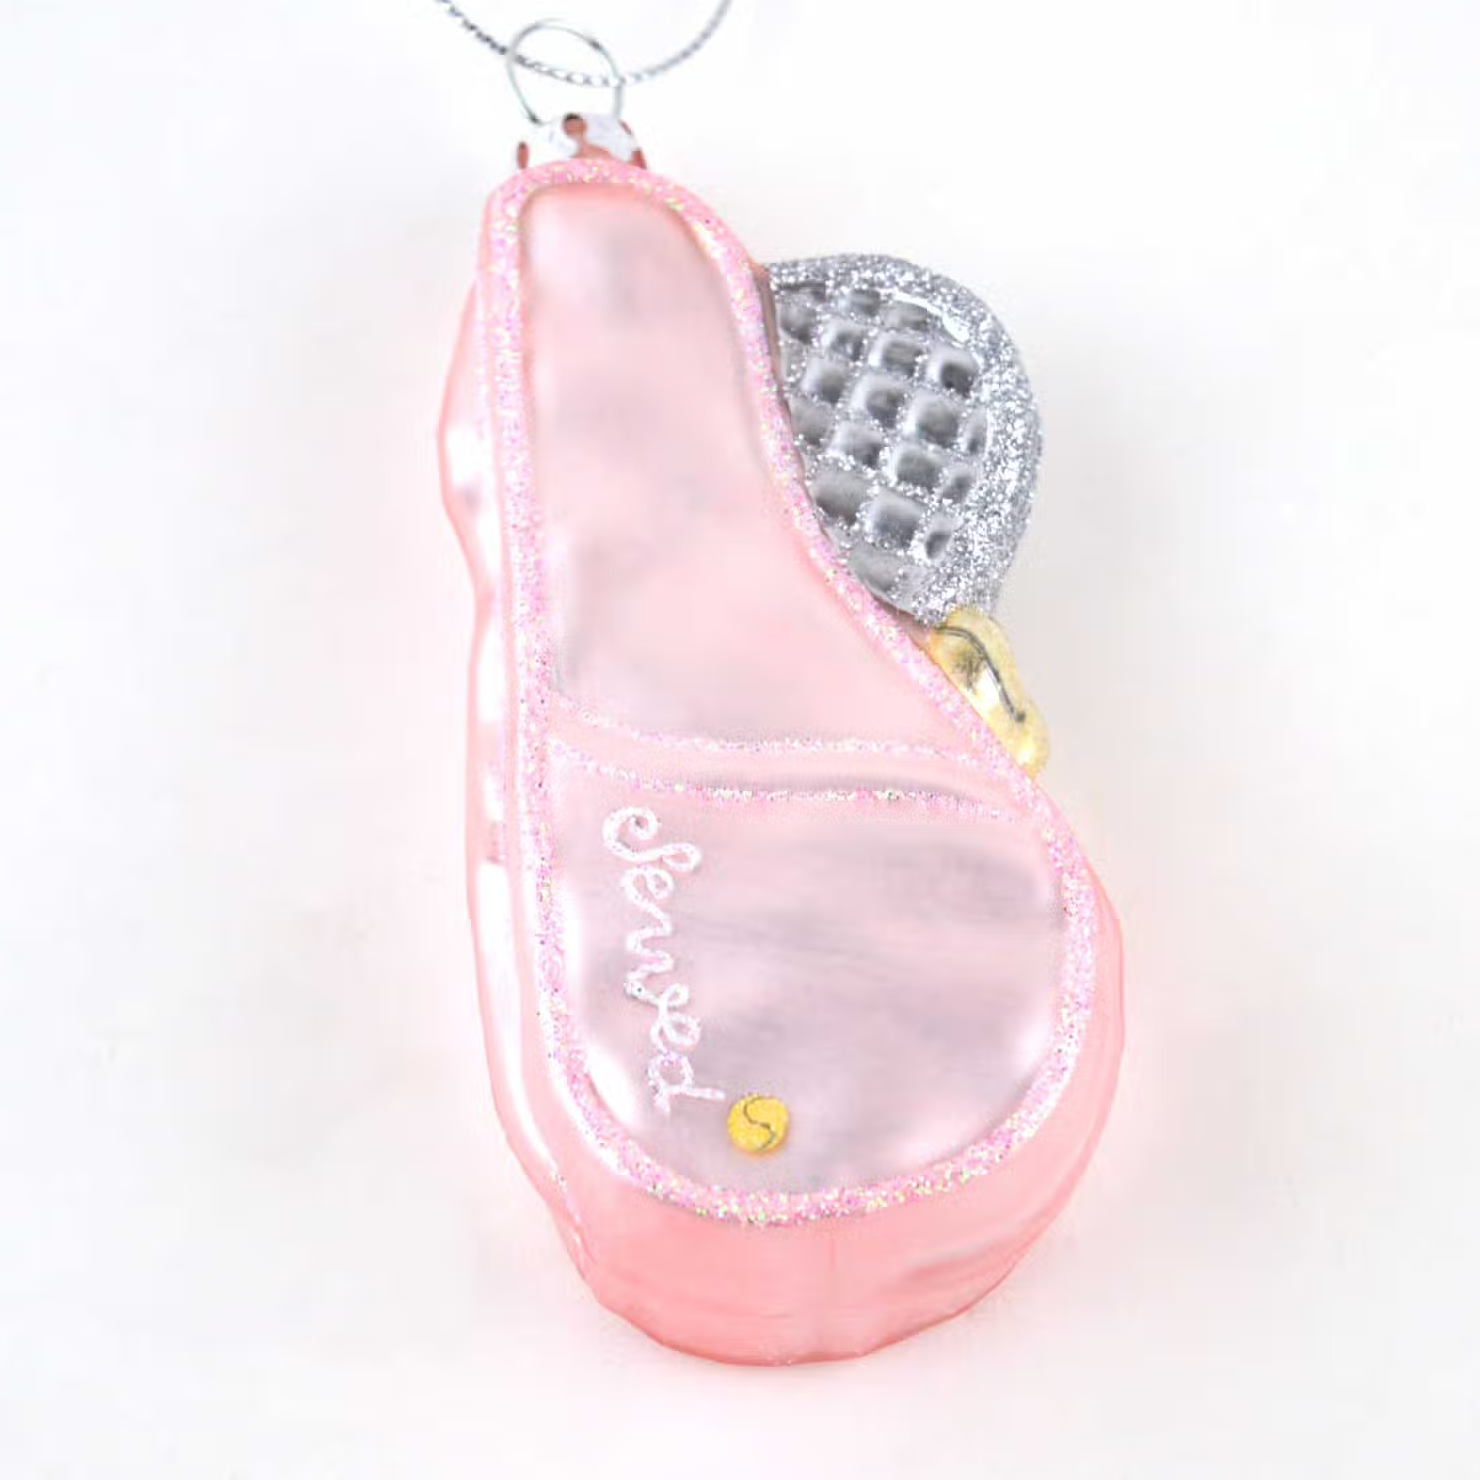 close up shot of pink tennis racket bag shaped ornament with a silver and glittery racket sticking out of the bag. Ornament had silver string